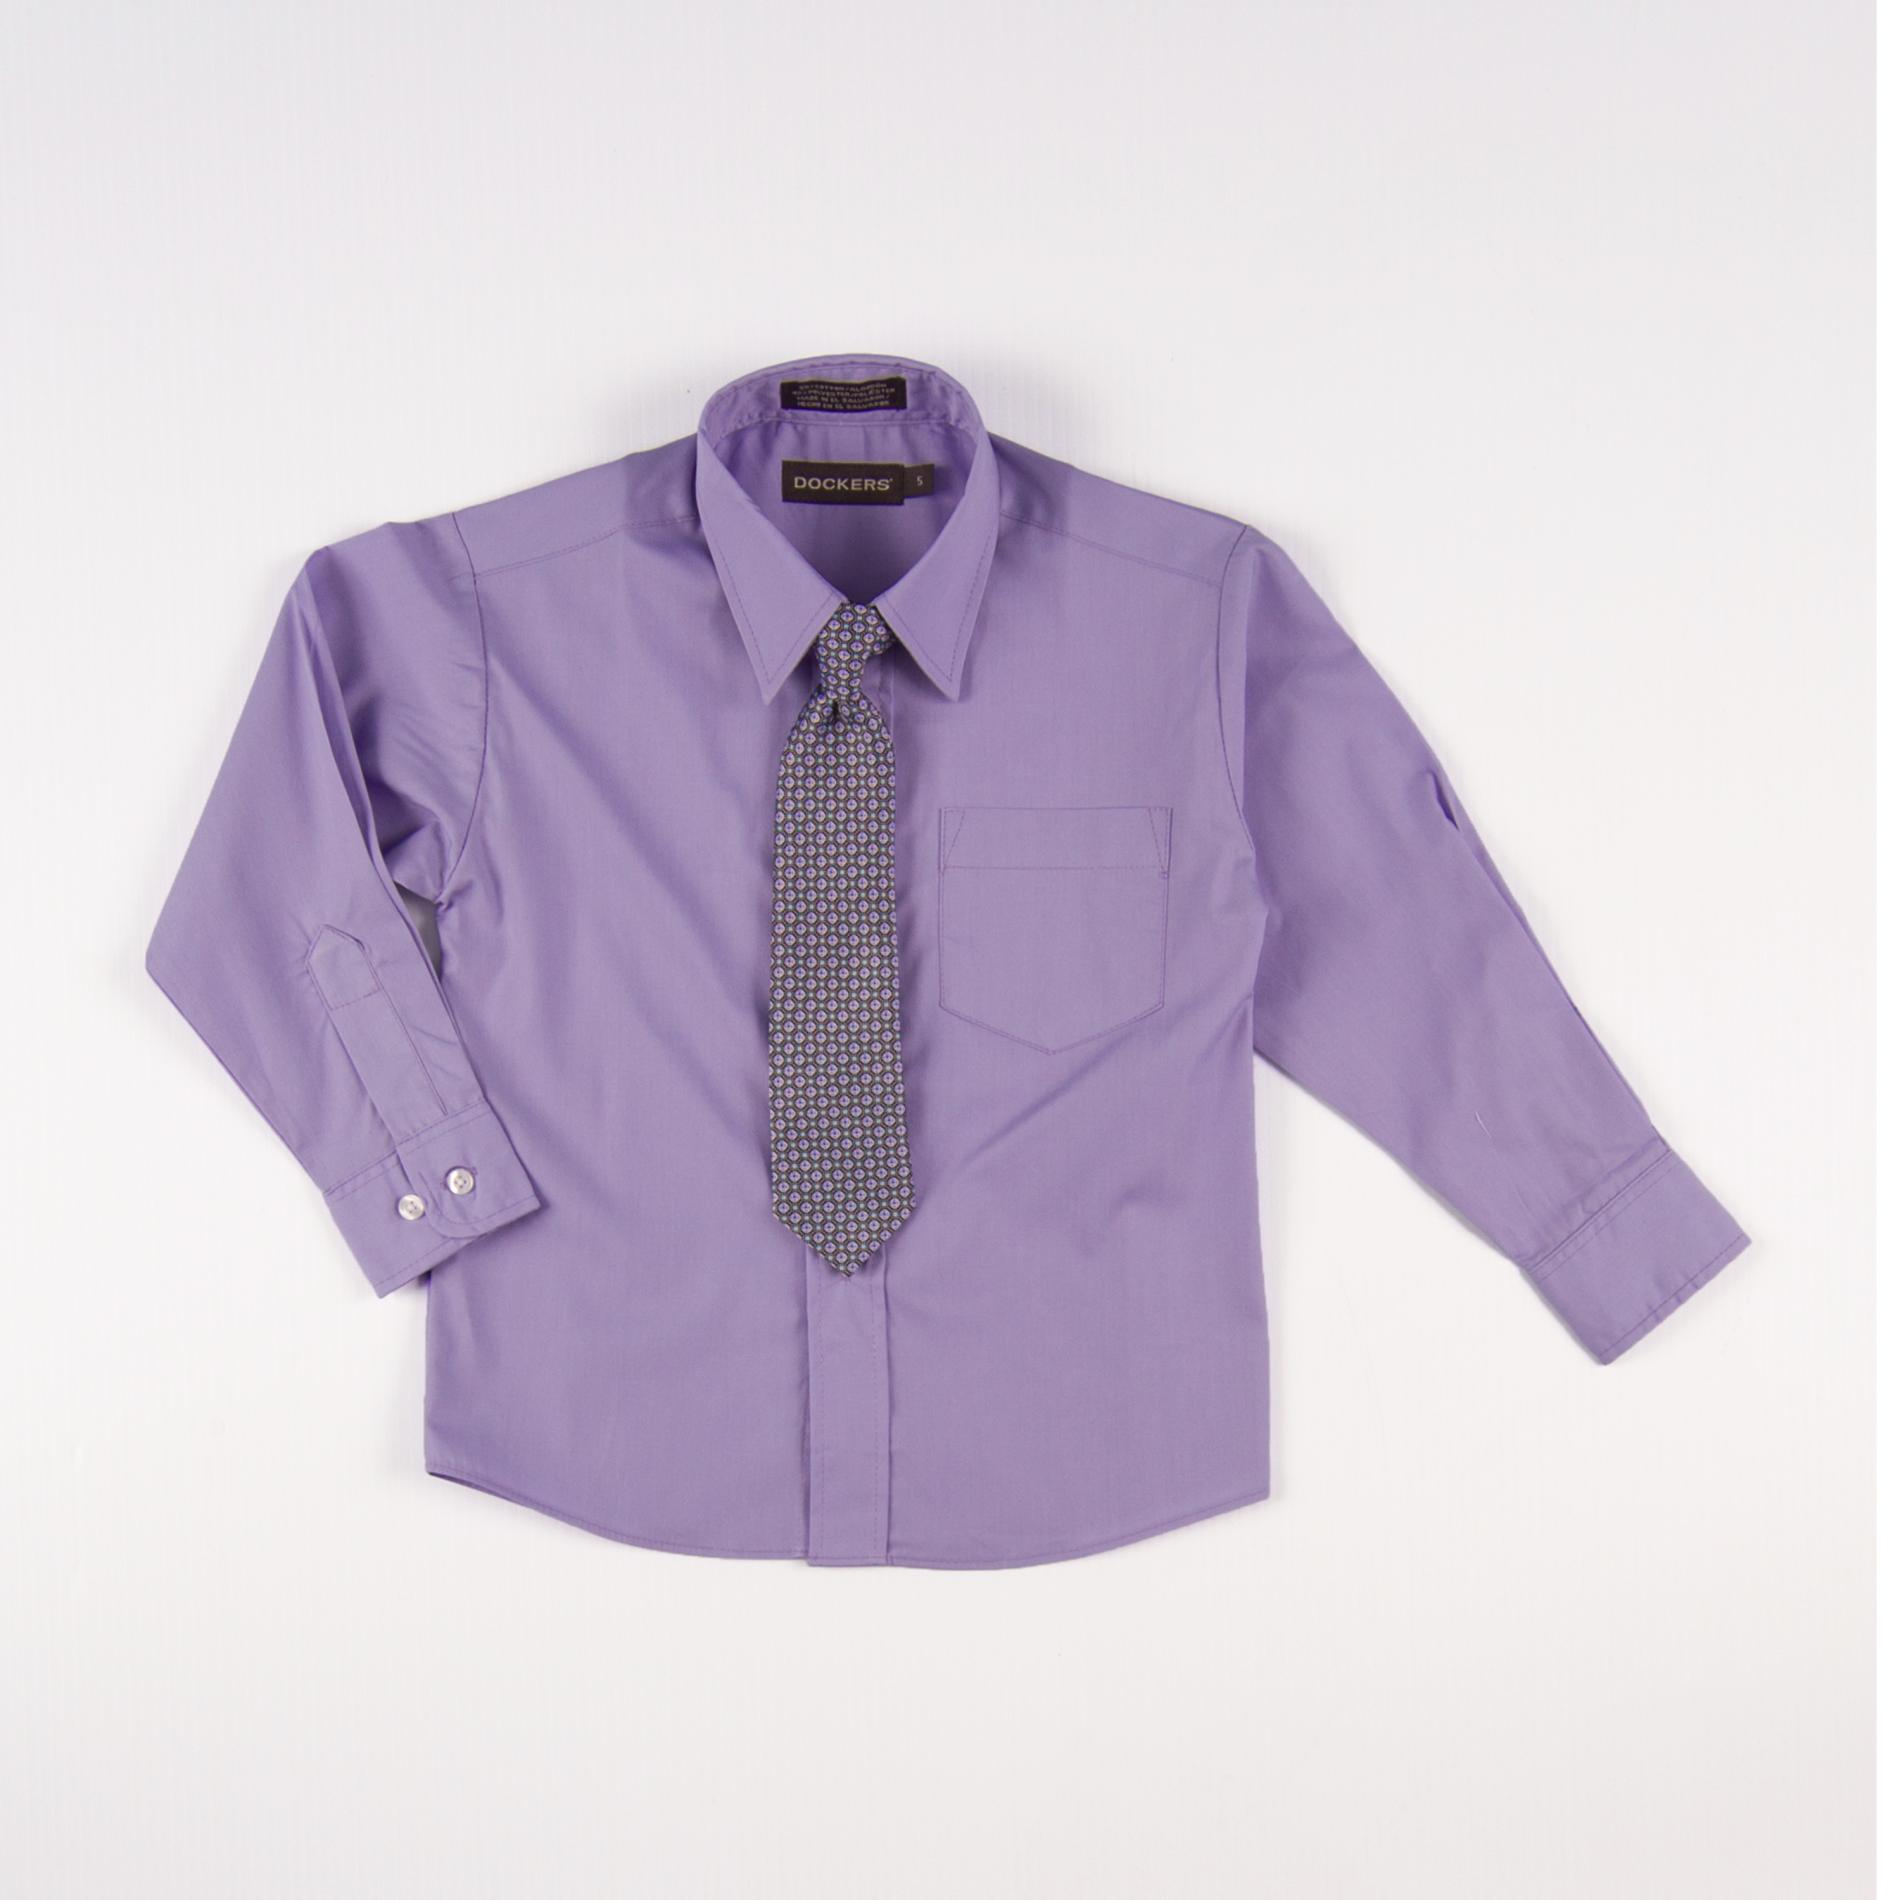 Dockers Boy's Button-Front Dress Shirt & Tie - Dotted